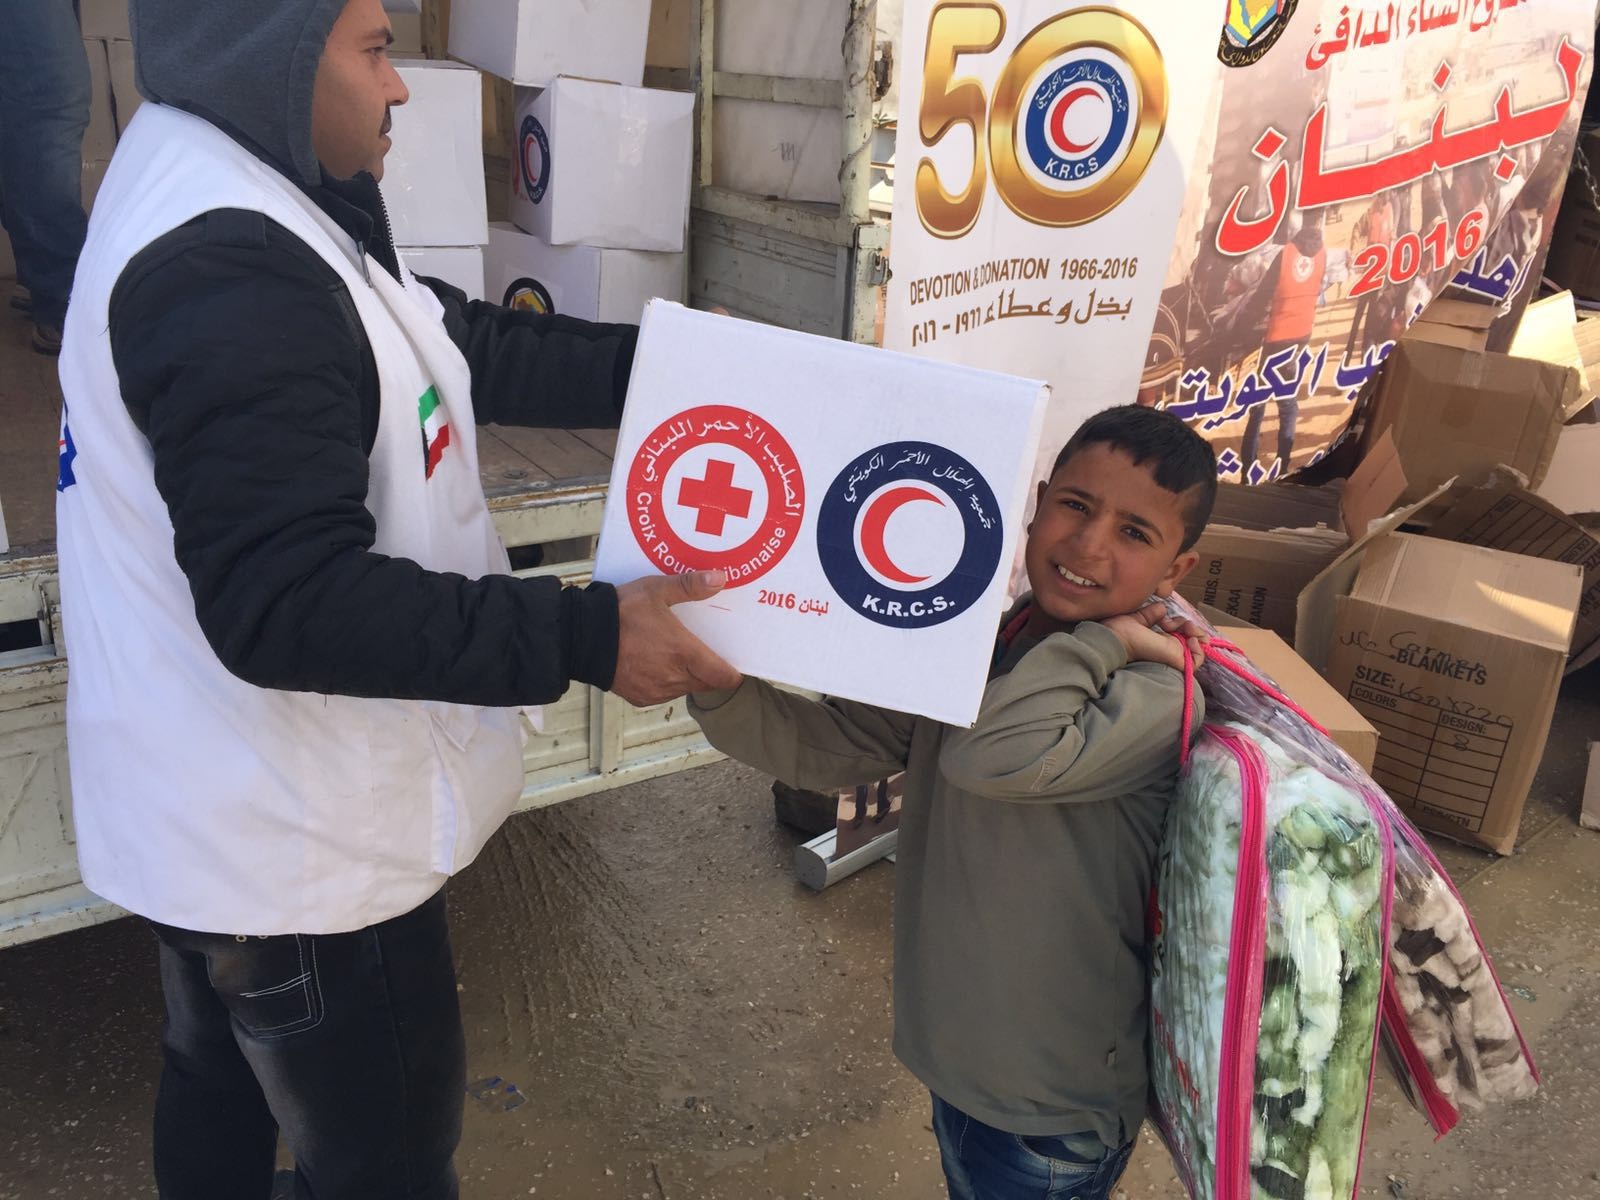 Members of Kuwait Red Crescent Society (KRCS) distributed humaintarian aids on displaced Syrian families in Lebanon